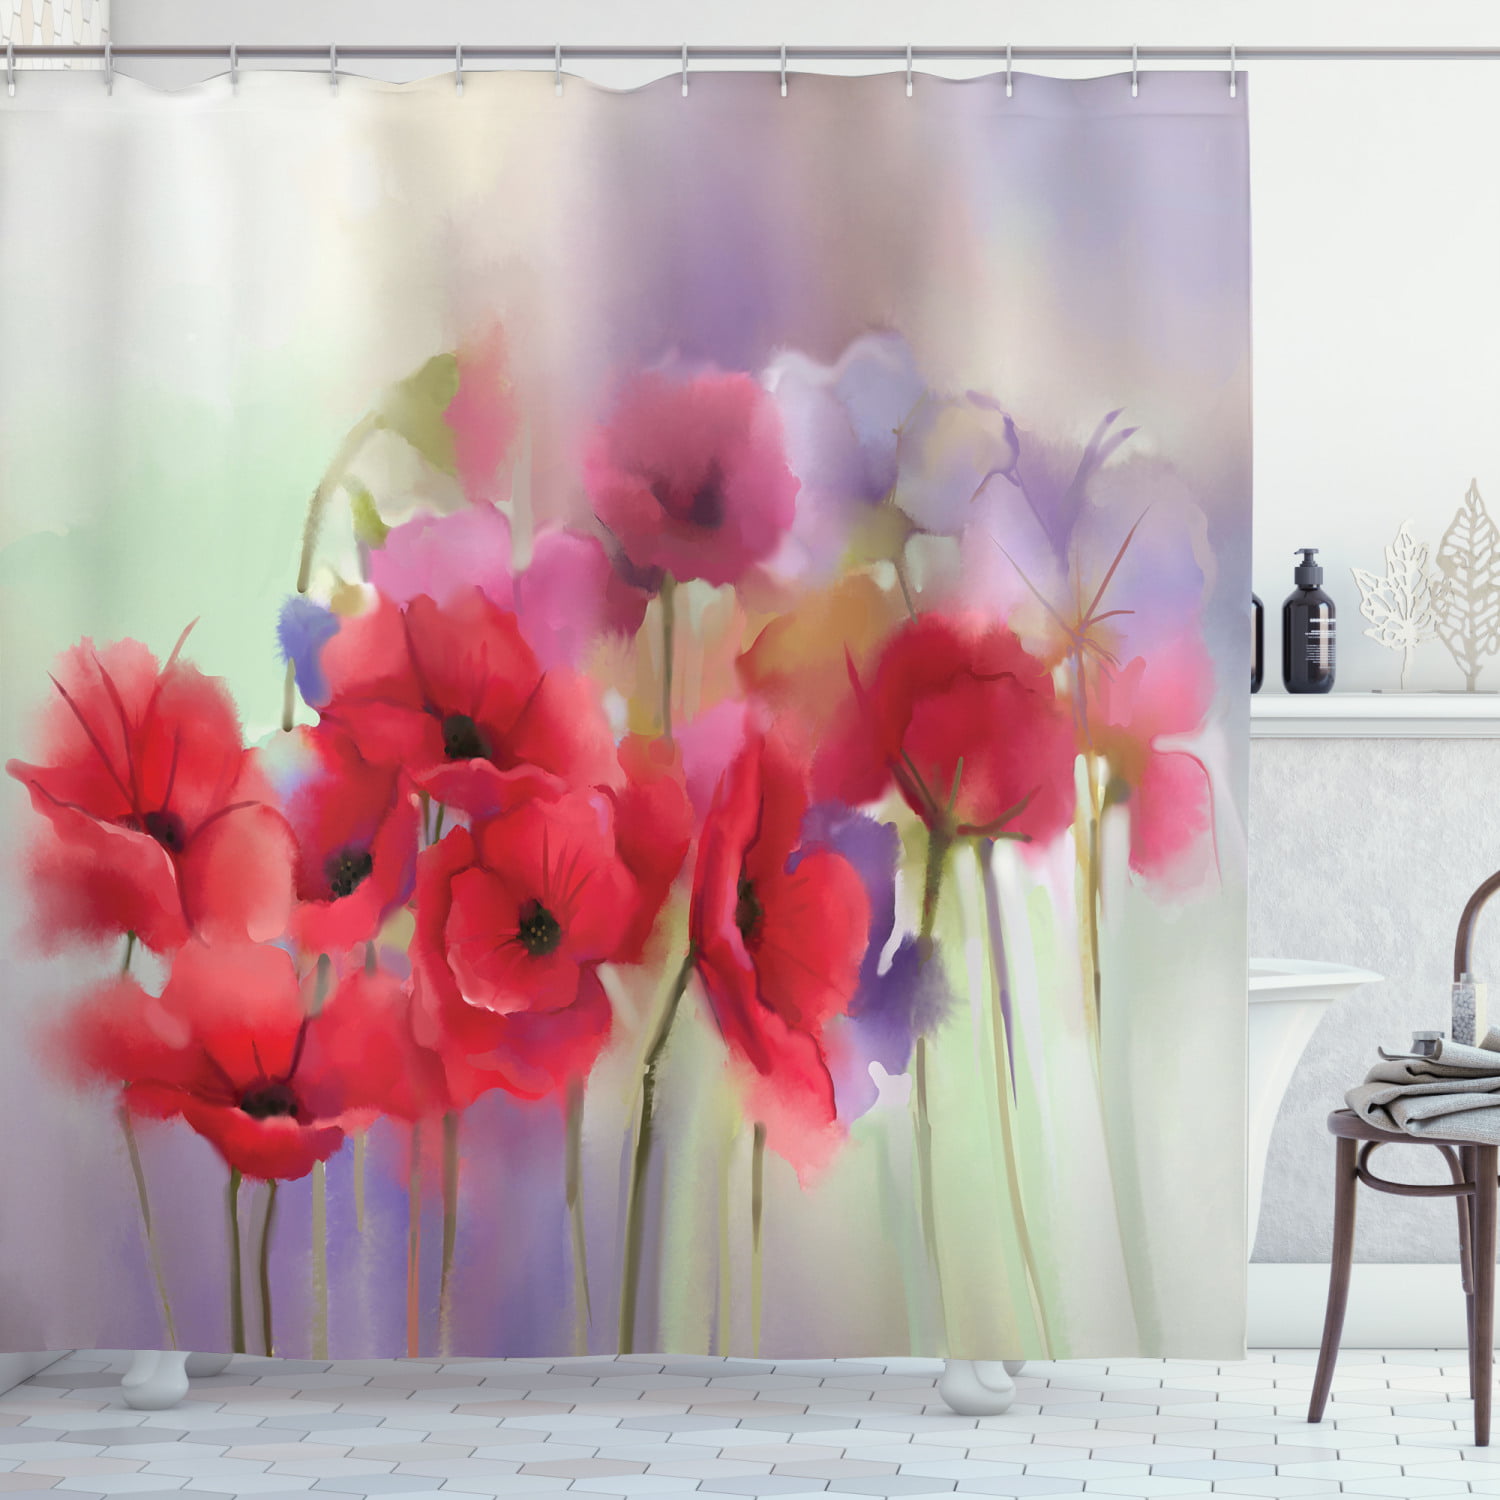 Details about   Floral Shower Curtain Blooming Red Flower Artwork Shower Curtains for Bathroom 